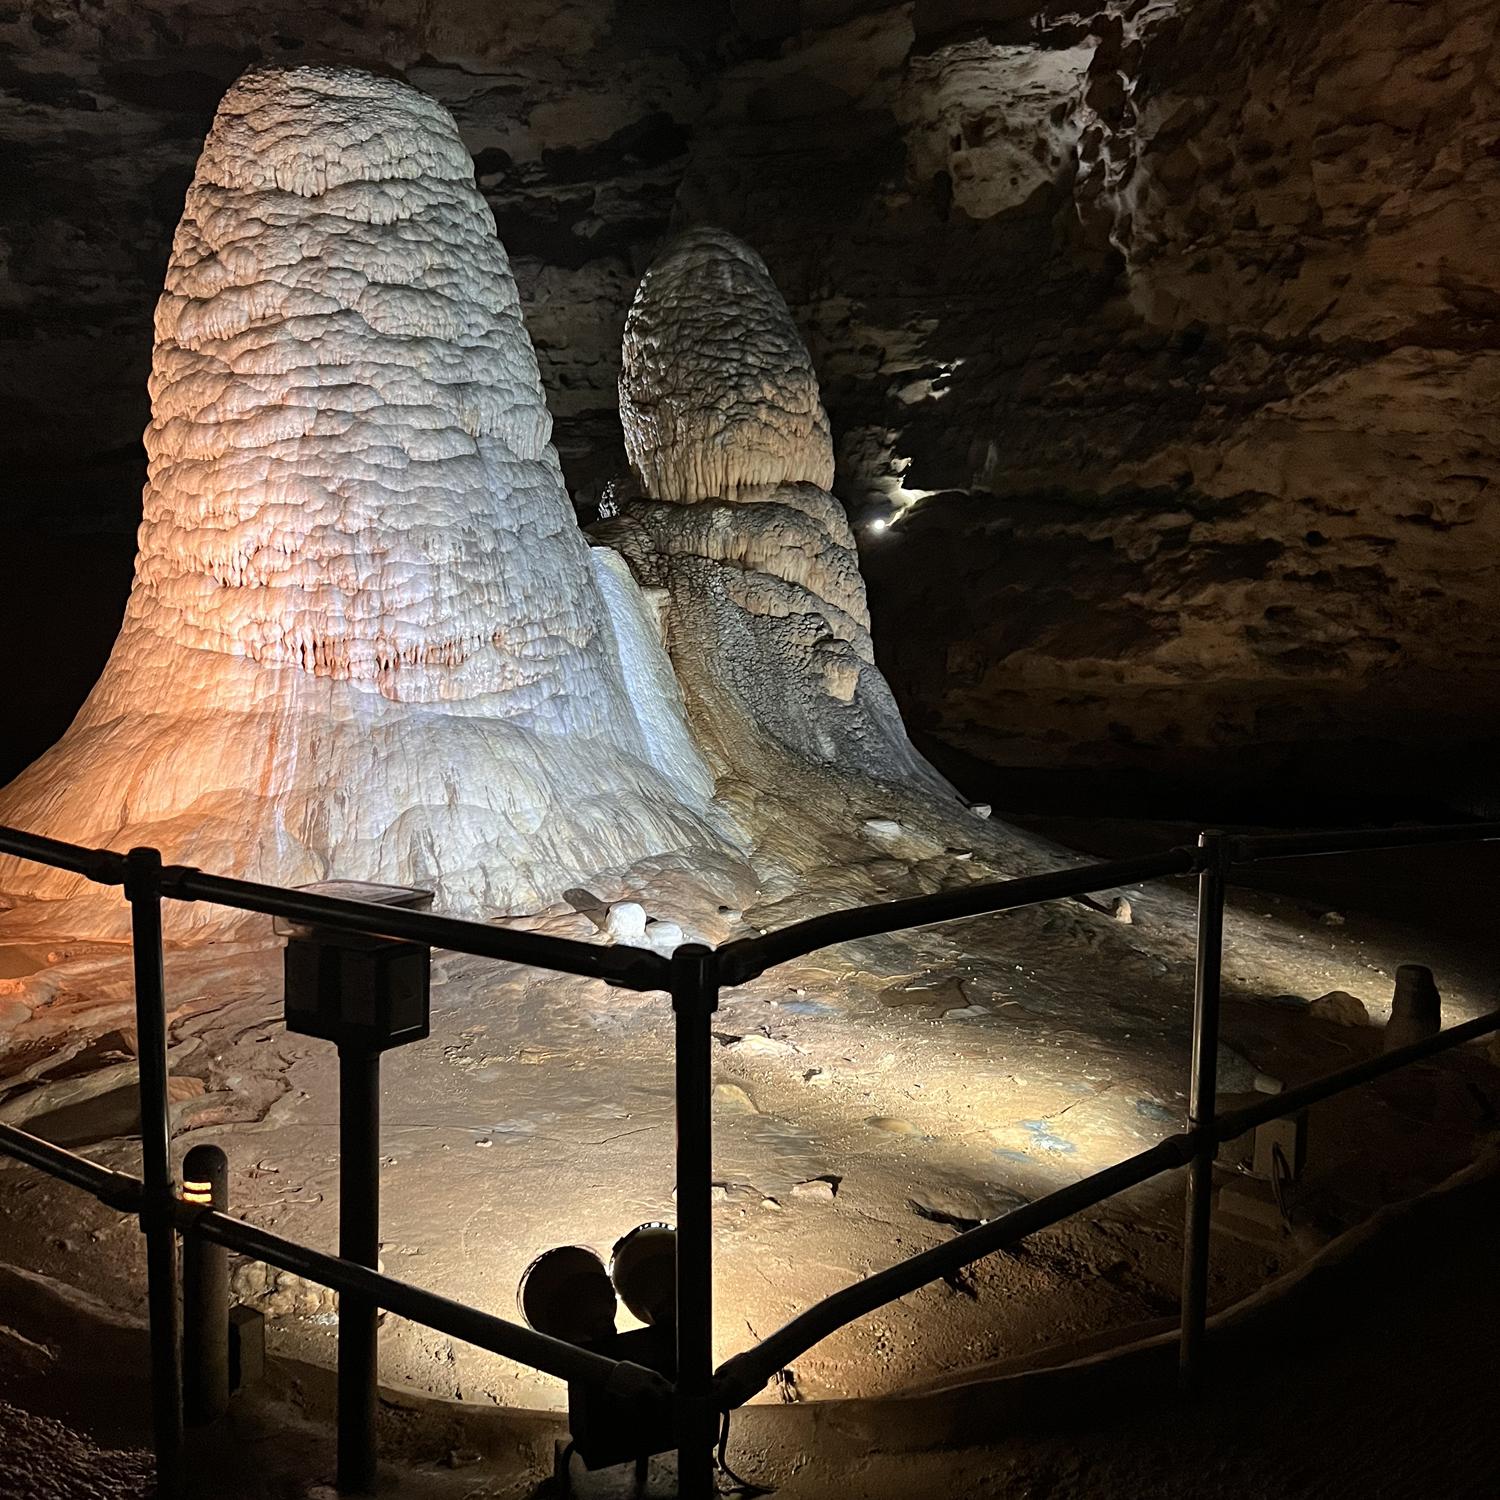 One of the many stalagmites we saw in the bowels of Missouri (in the caves)…